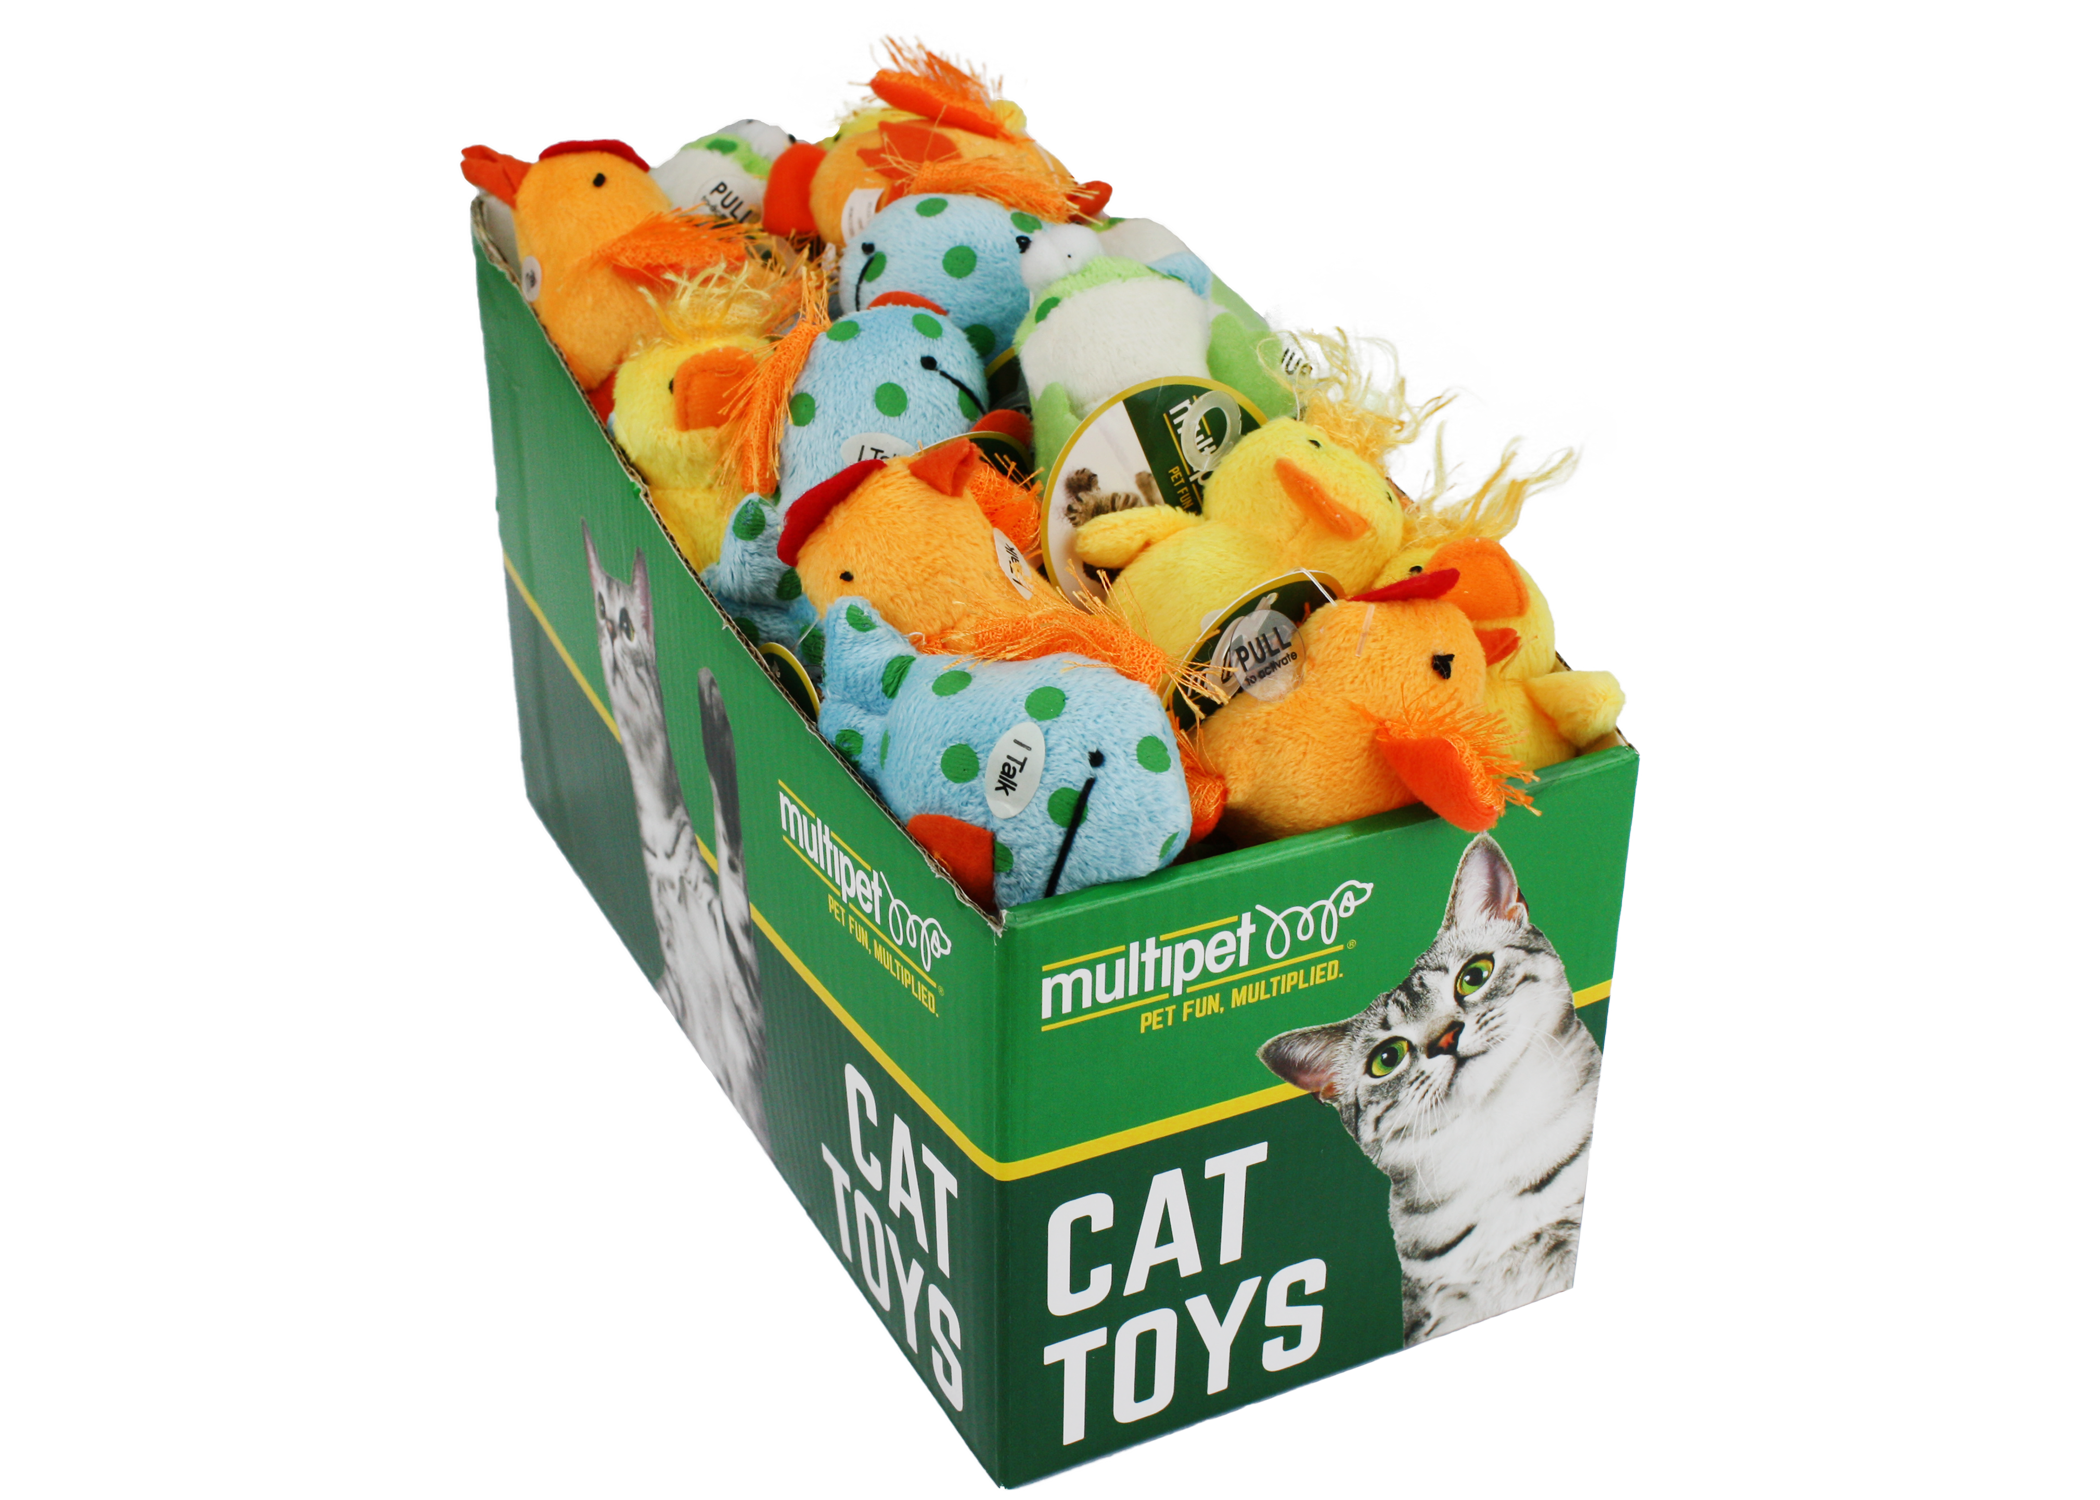 Multipet Look Who's Talking Cat Dog Toy